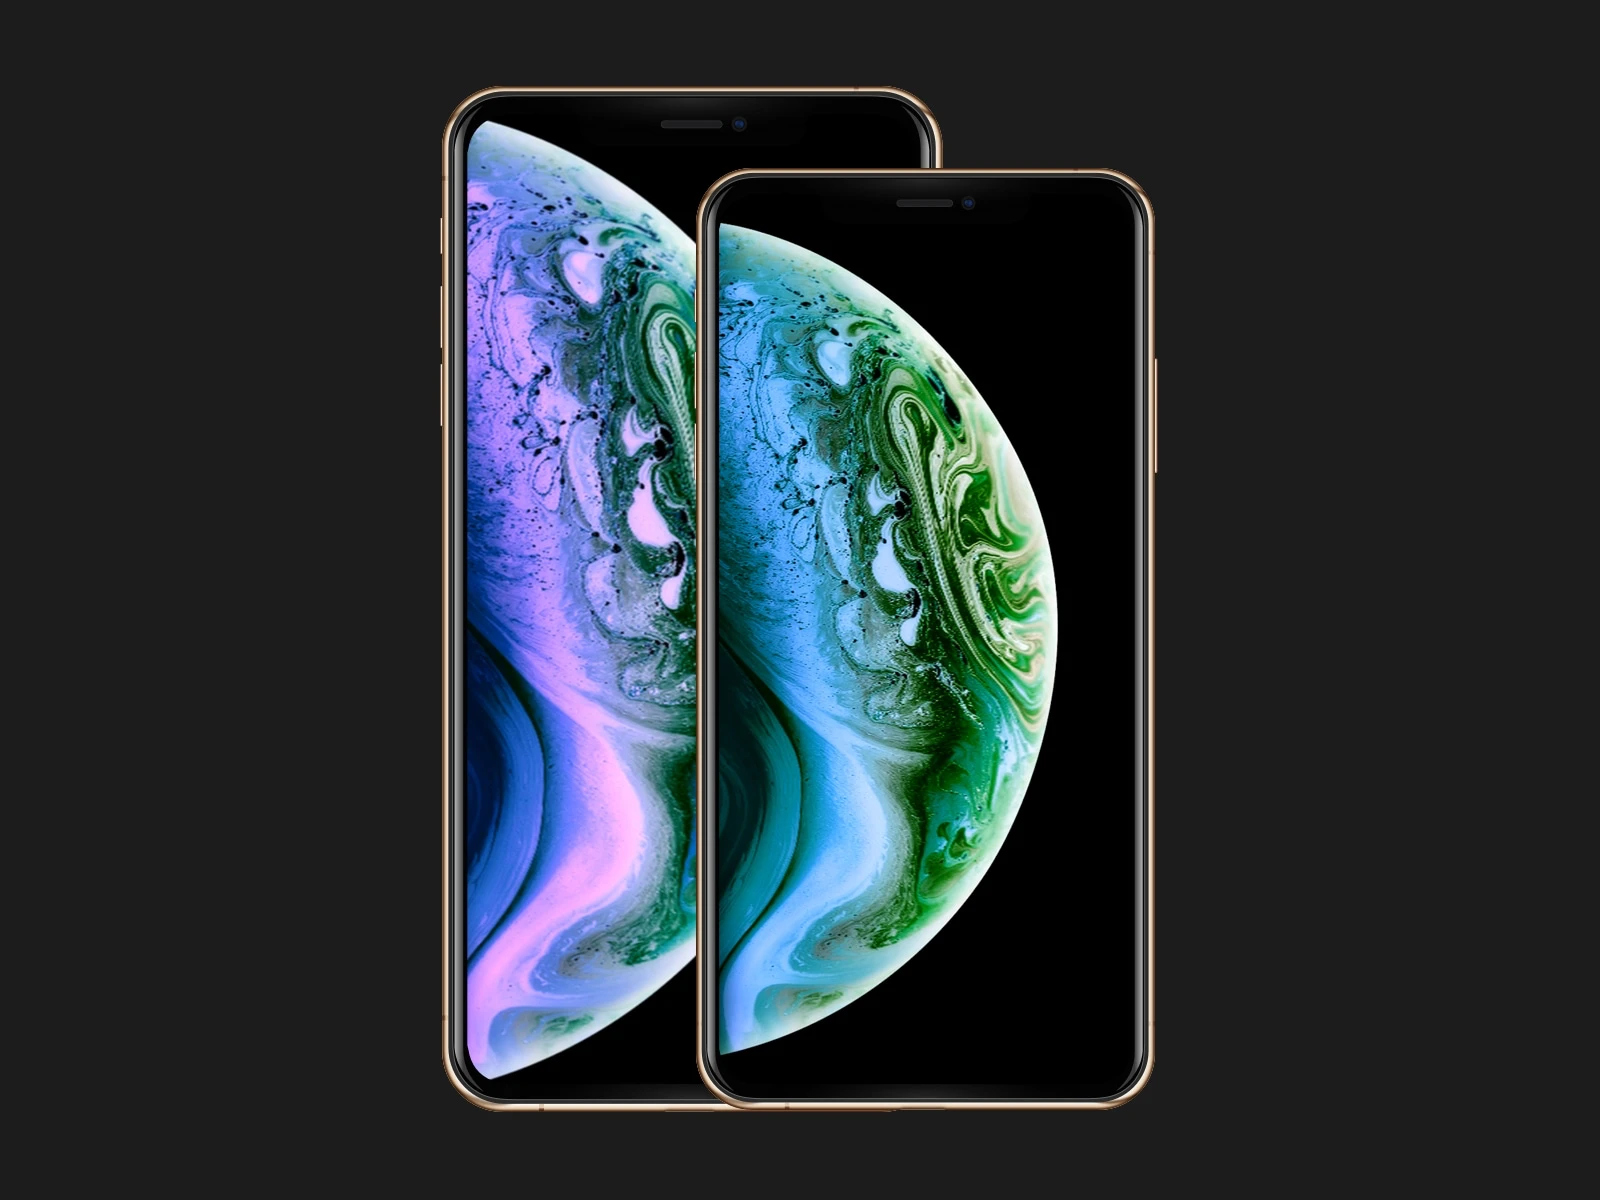 iPhone XS/Max Mockups - Fully-vector based screen mockups for iPhone XS/Max with all the color variants